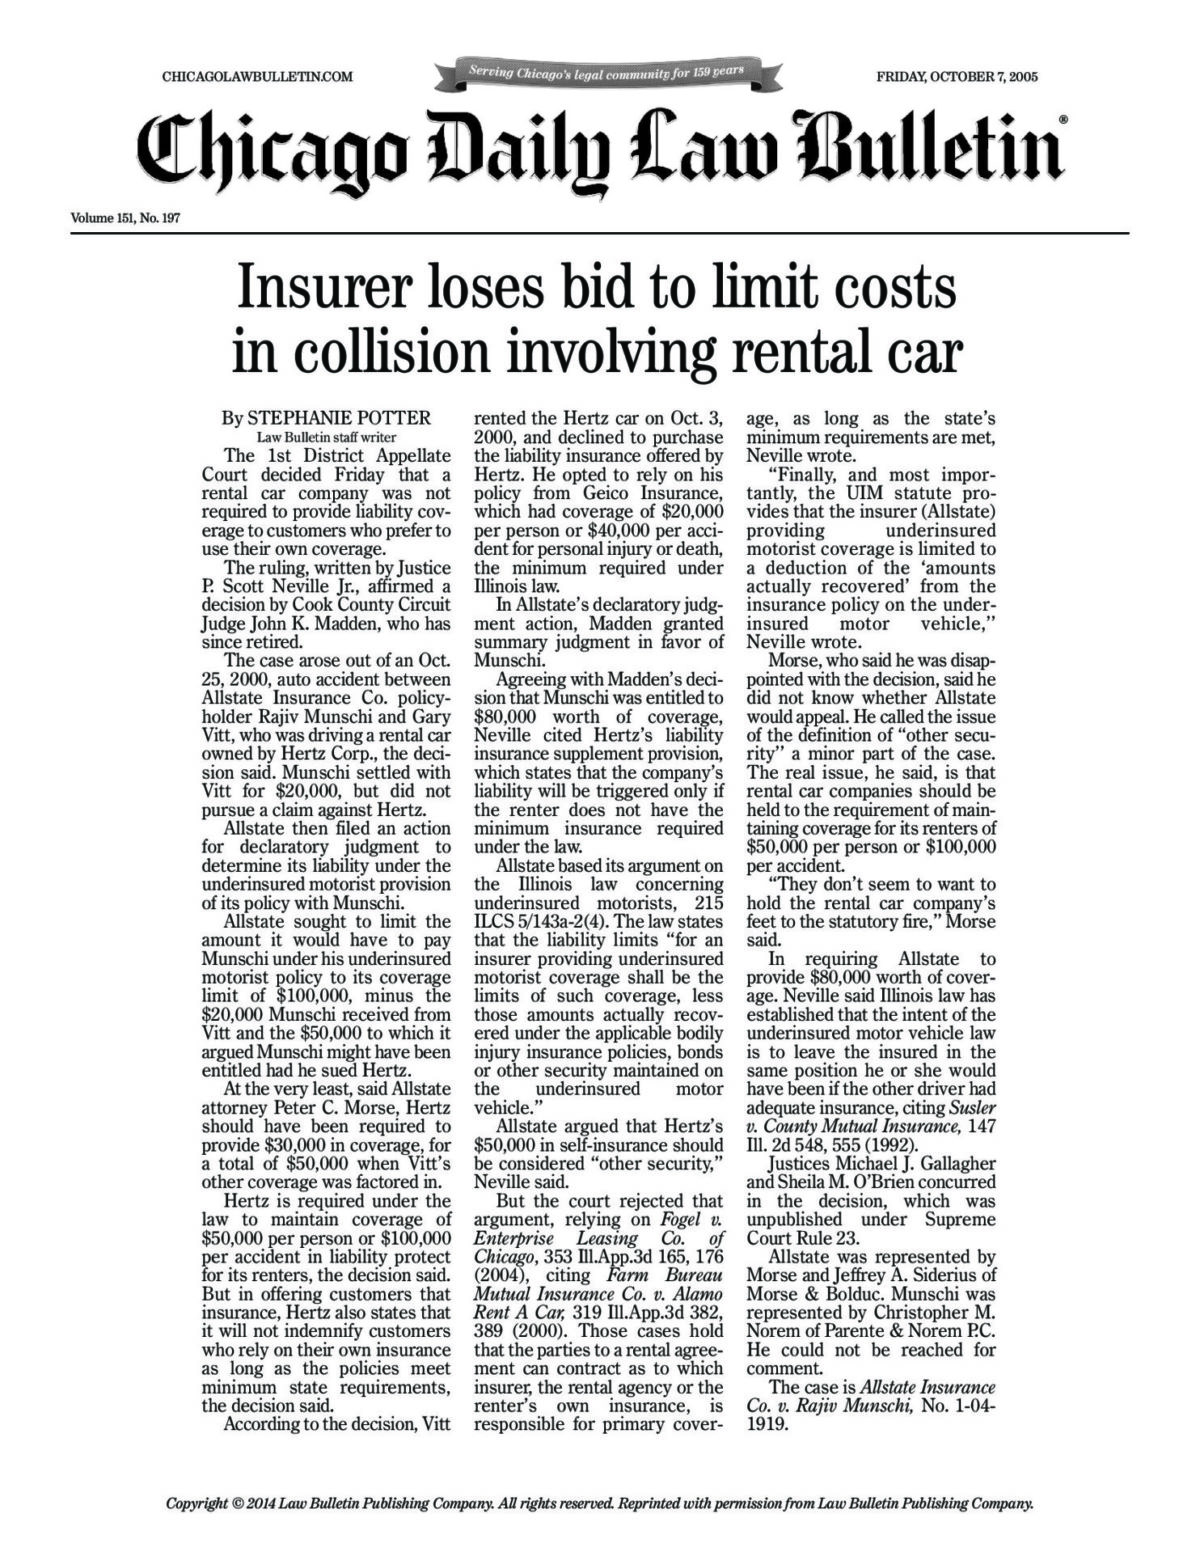 Insurer loses bid to limit costs in collision involving rental car